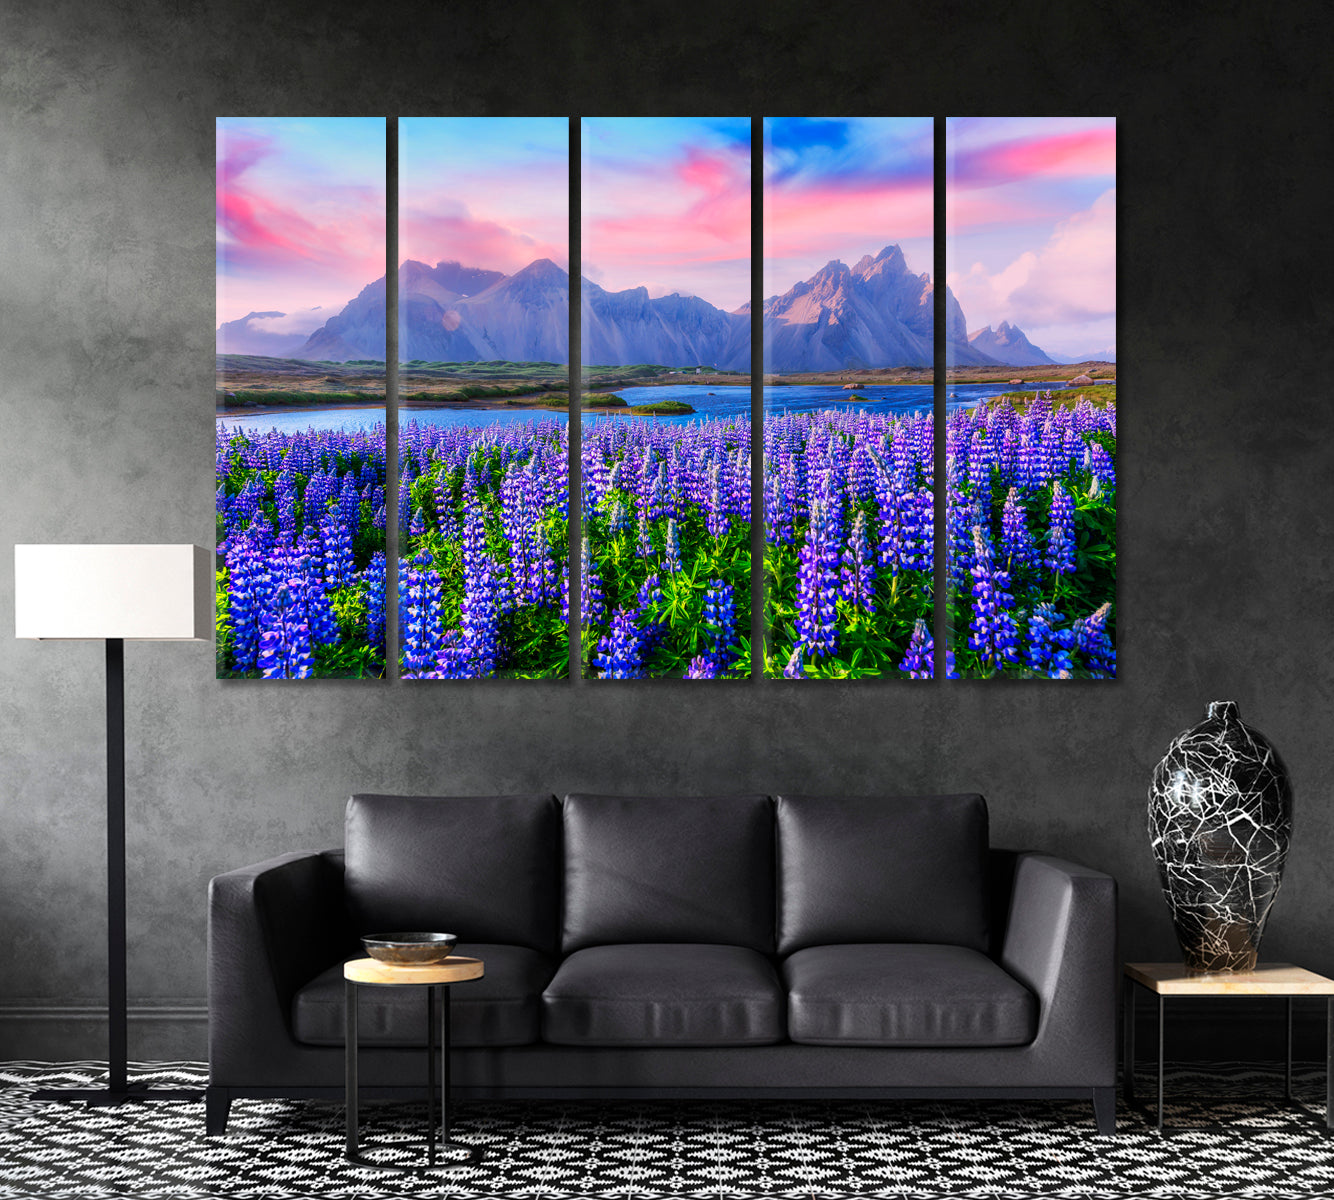 Famous Lupine Flowers near Stokksnes Mountains Iceland Canvas Print ArtLexy 5 Panels 36"x24" inches 